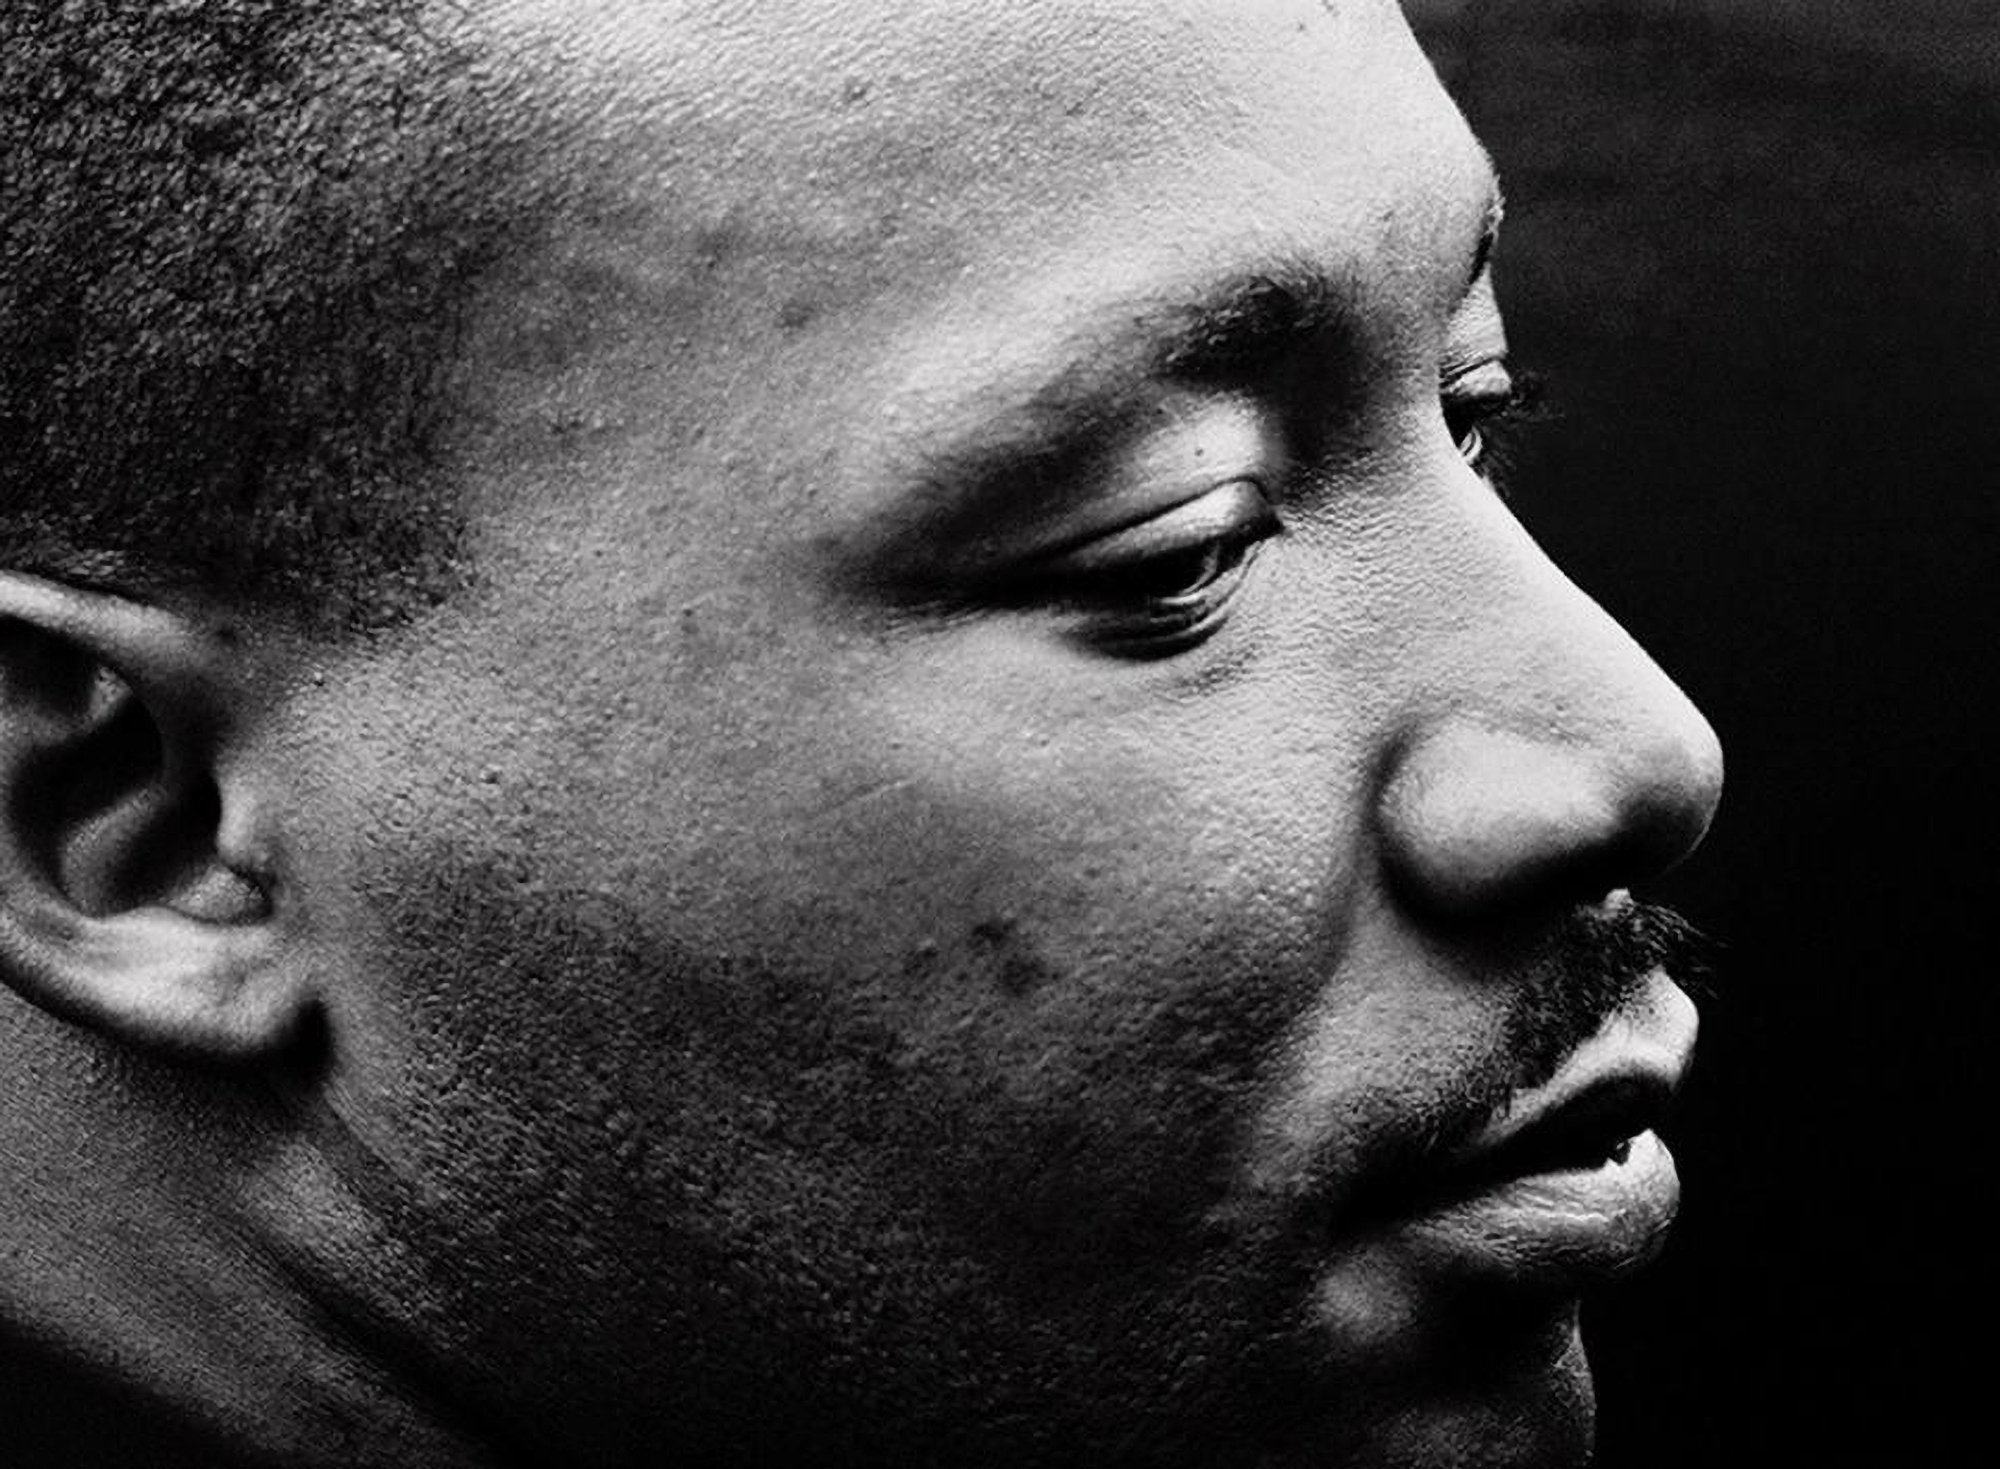  “Martin Luther King after I Have A Dream Speech” © Dan Budnik 